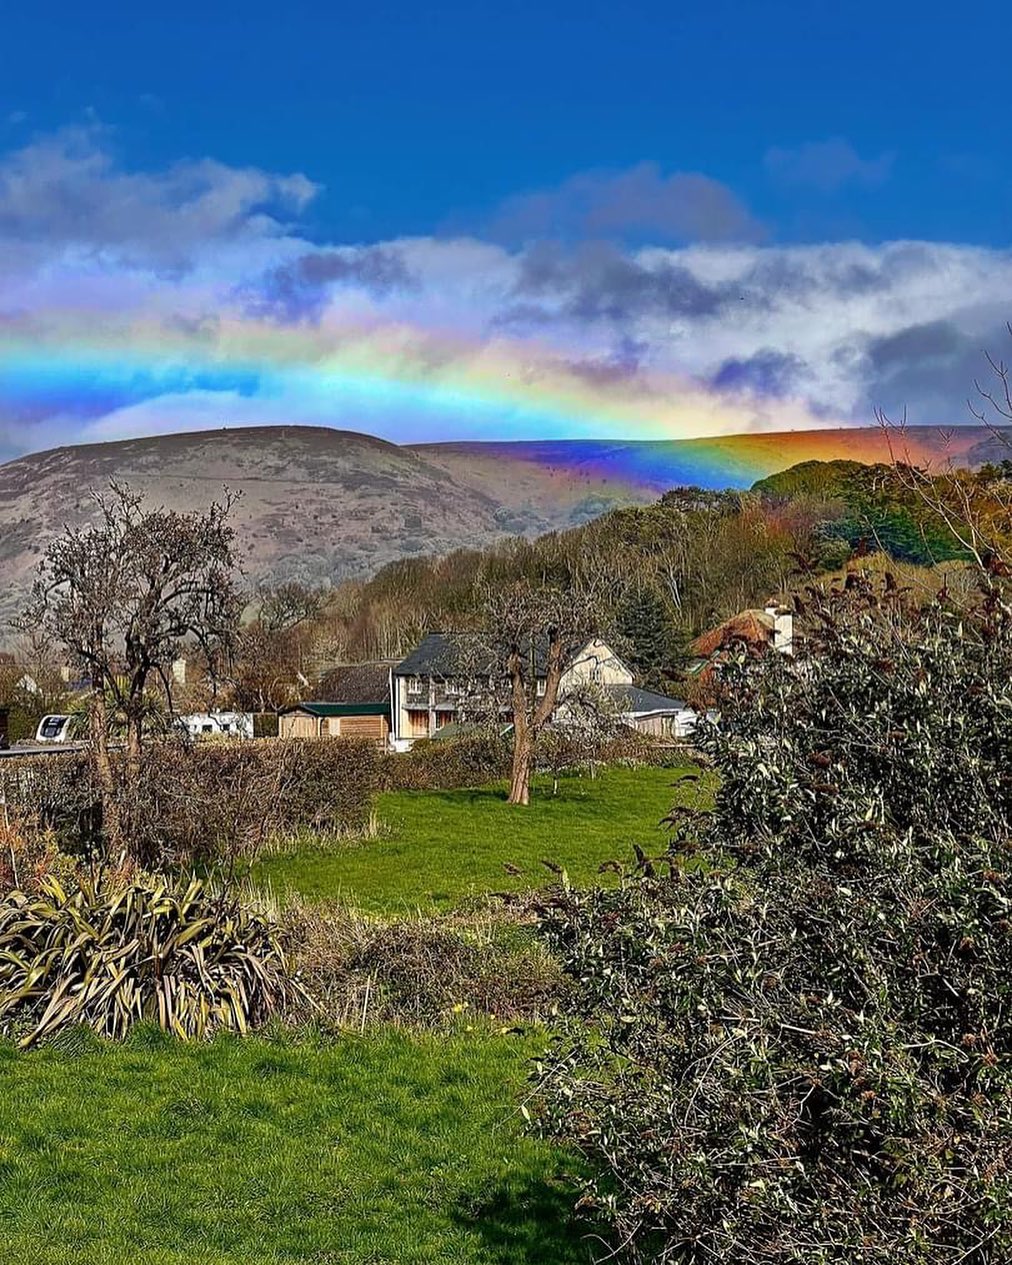 Rainbow over beautiful Exmoor countryside with a house in the distance nestled amongst trees below the impressive hills of the moors